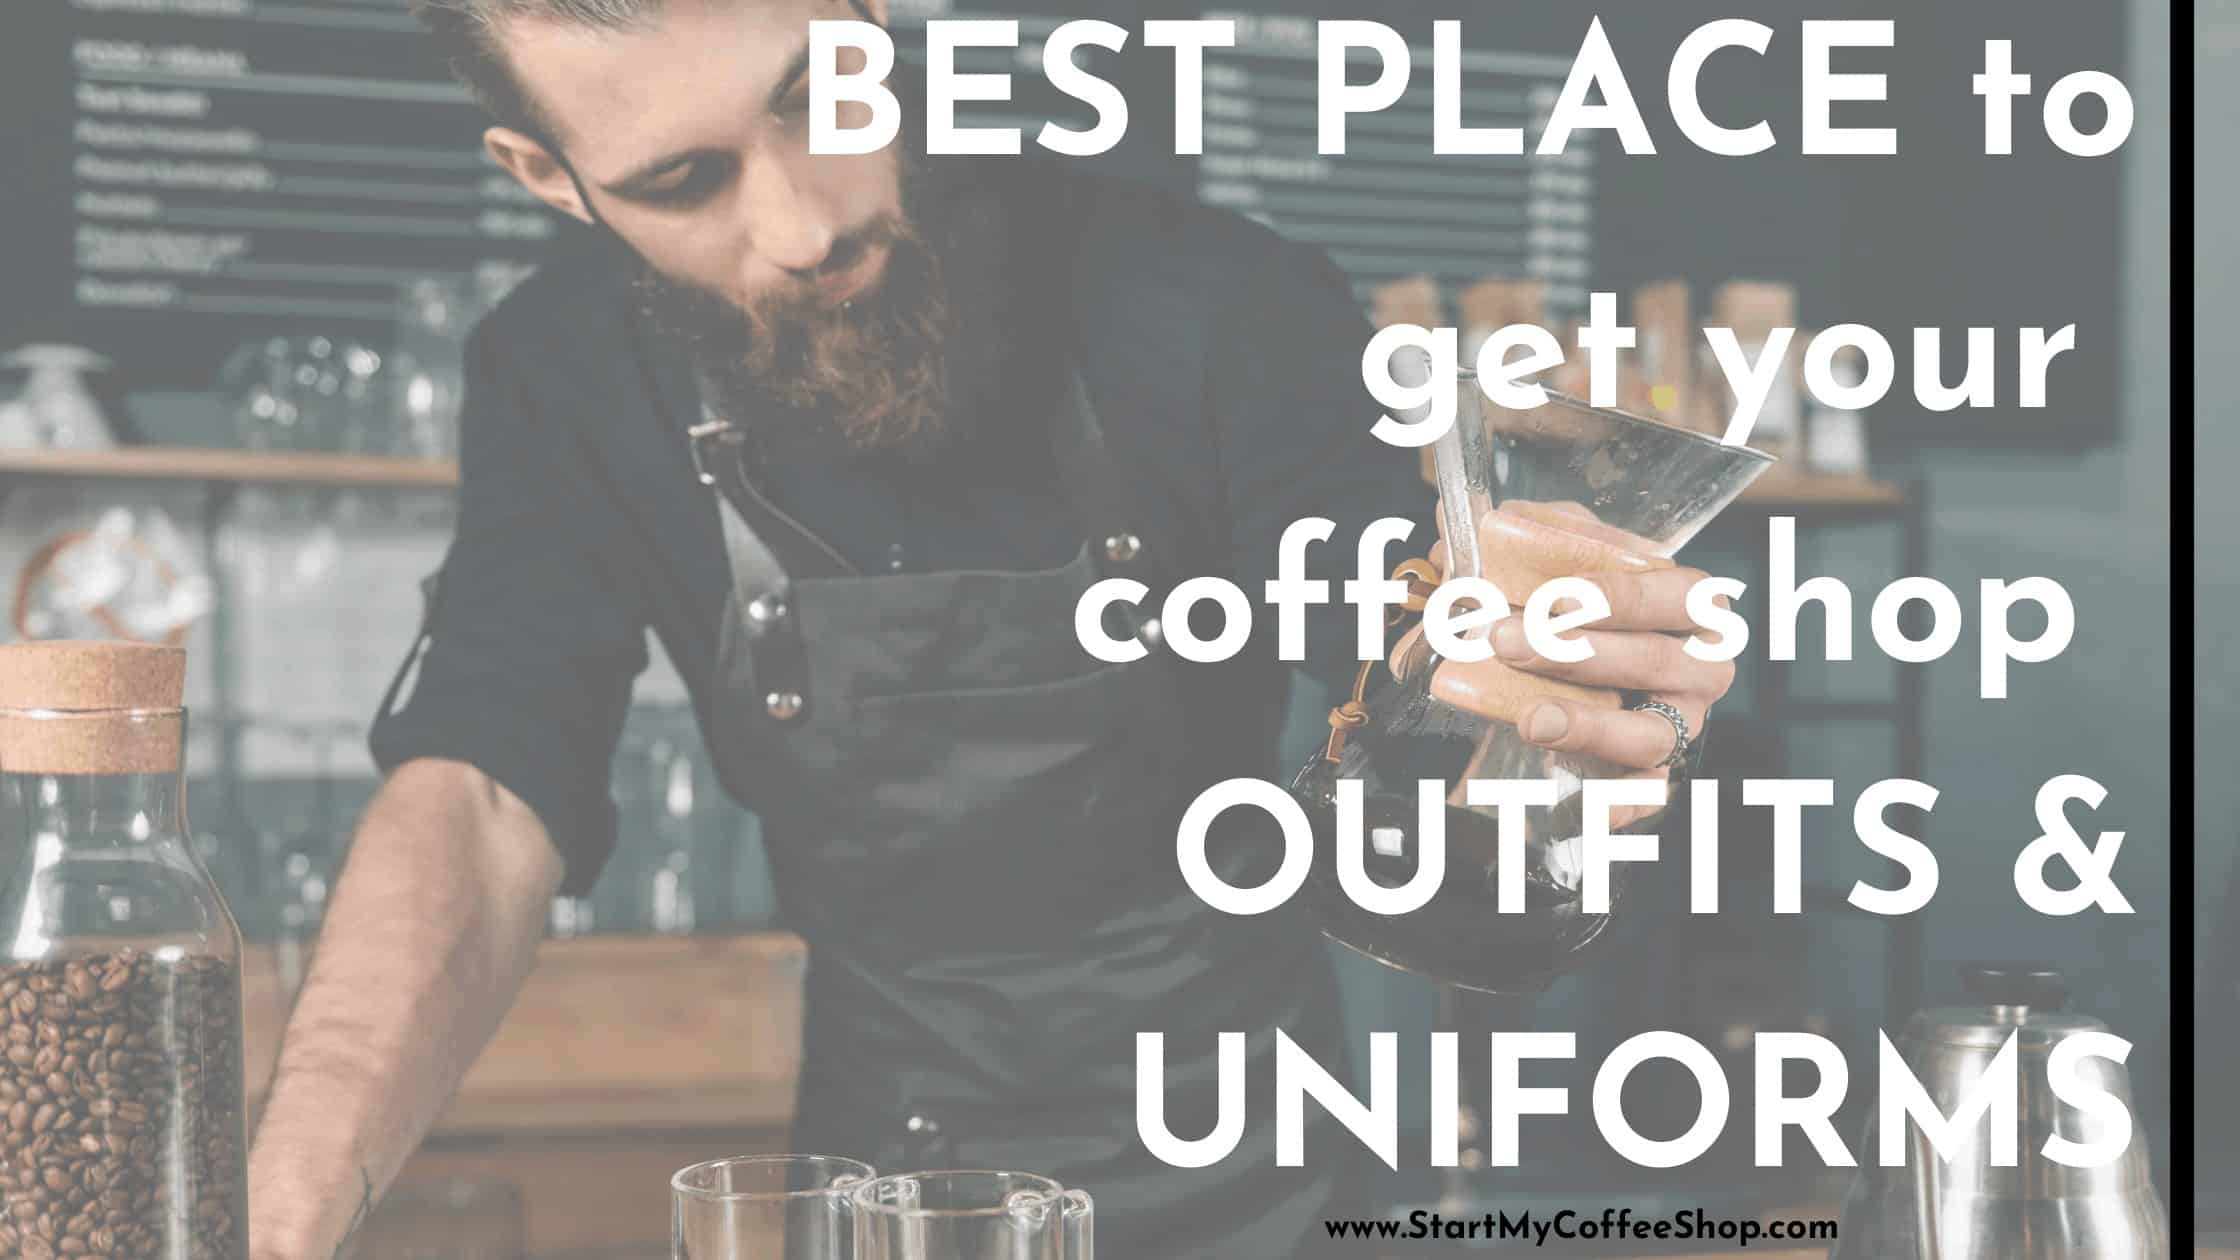 Best place to get your coffee shop outfits and uniforms